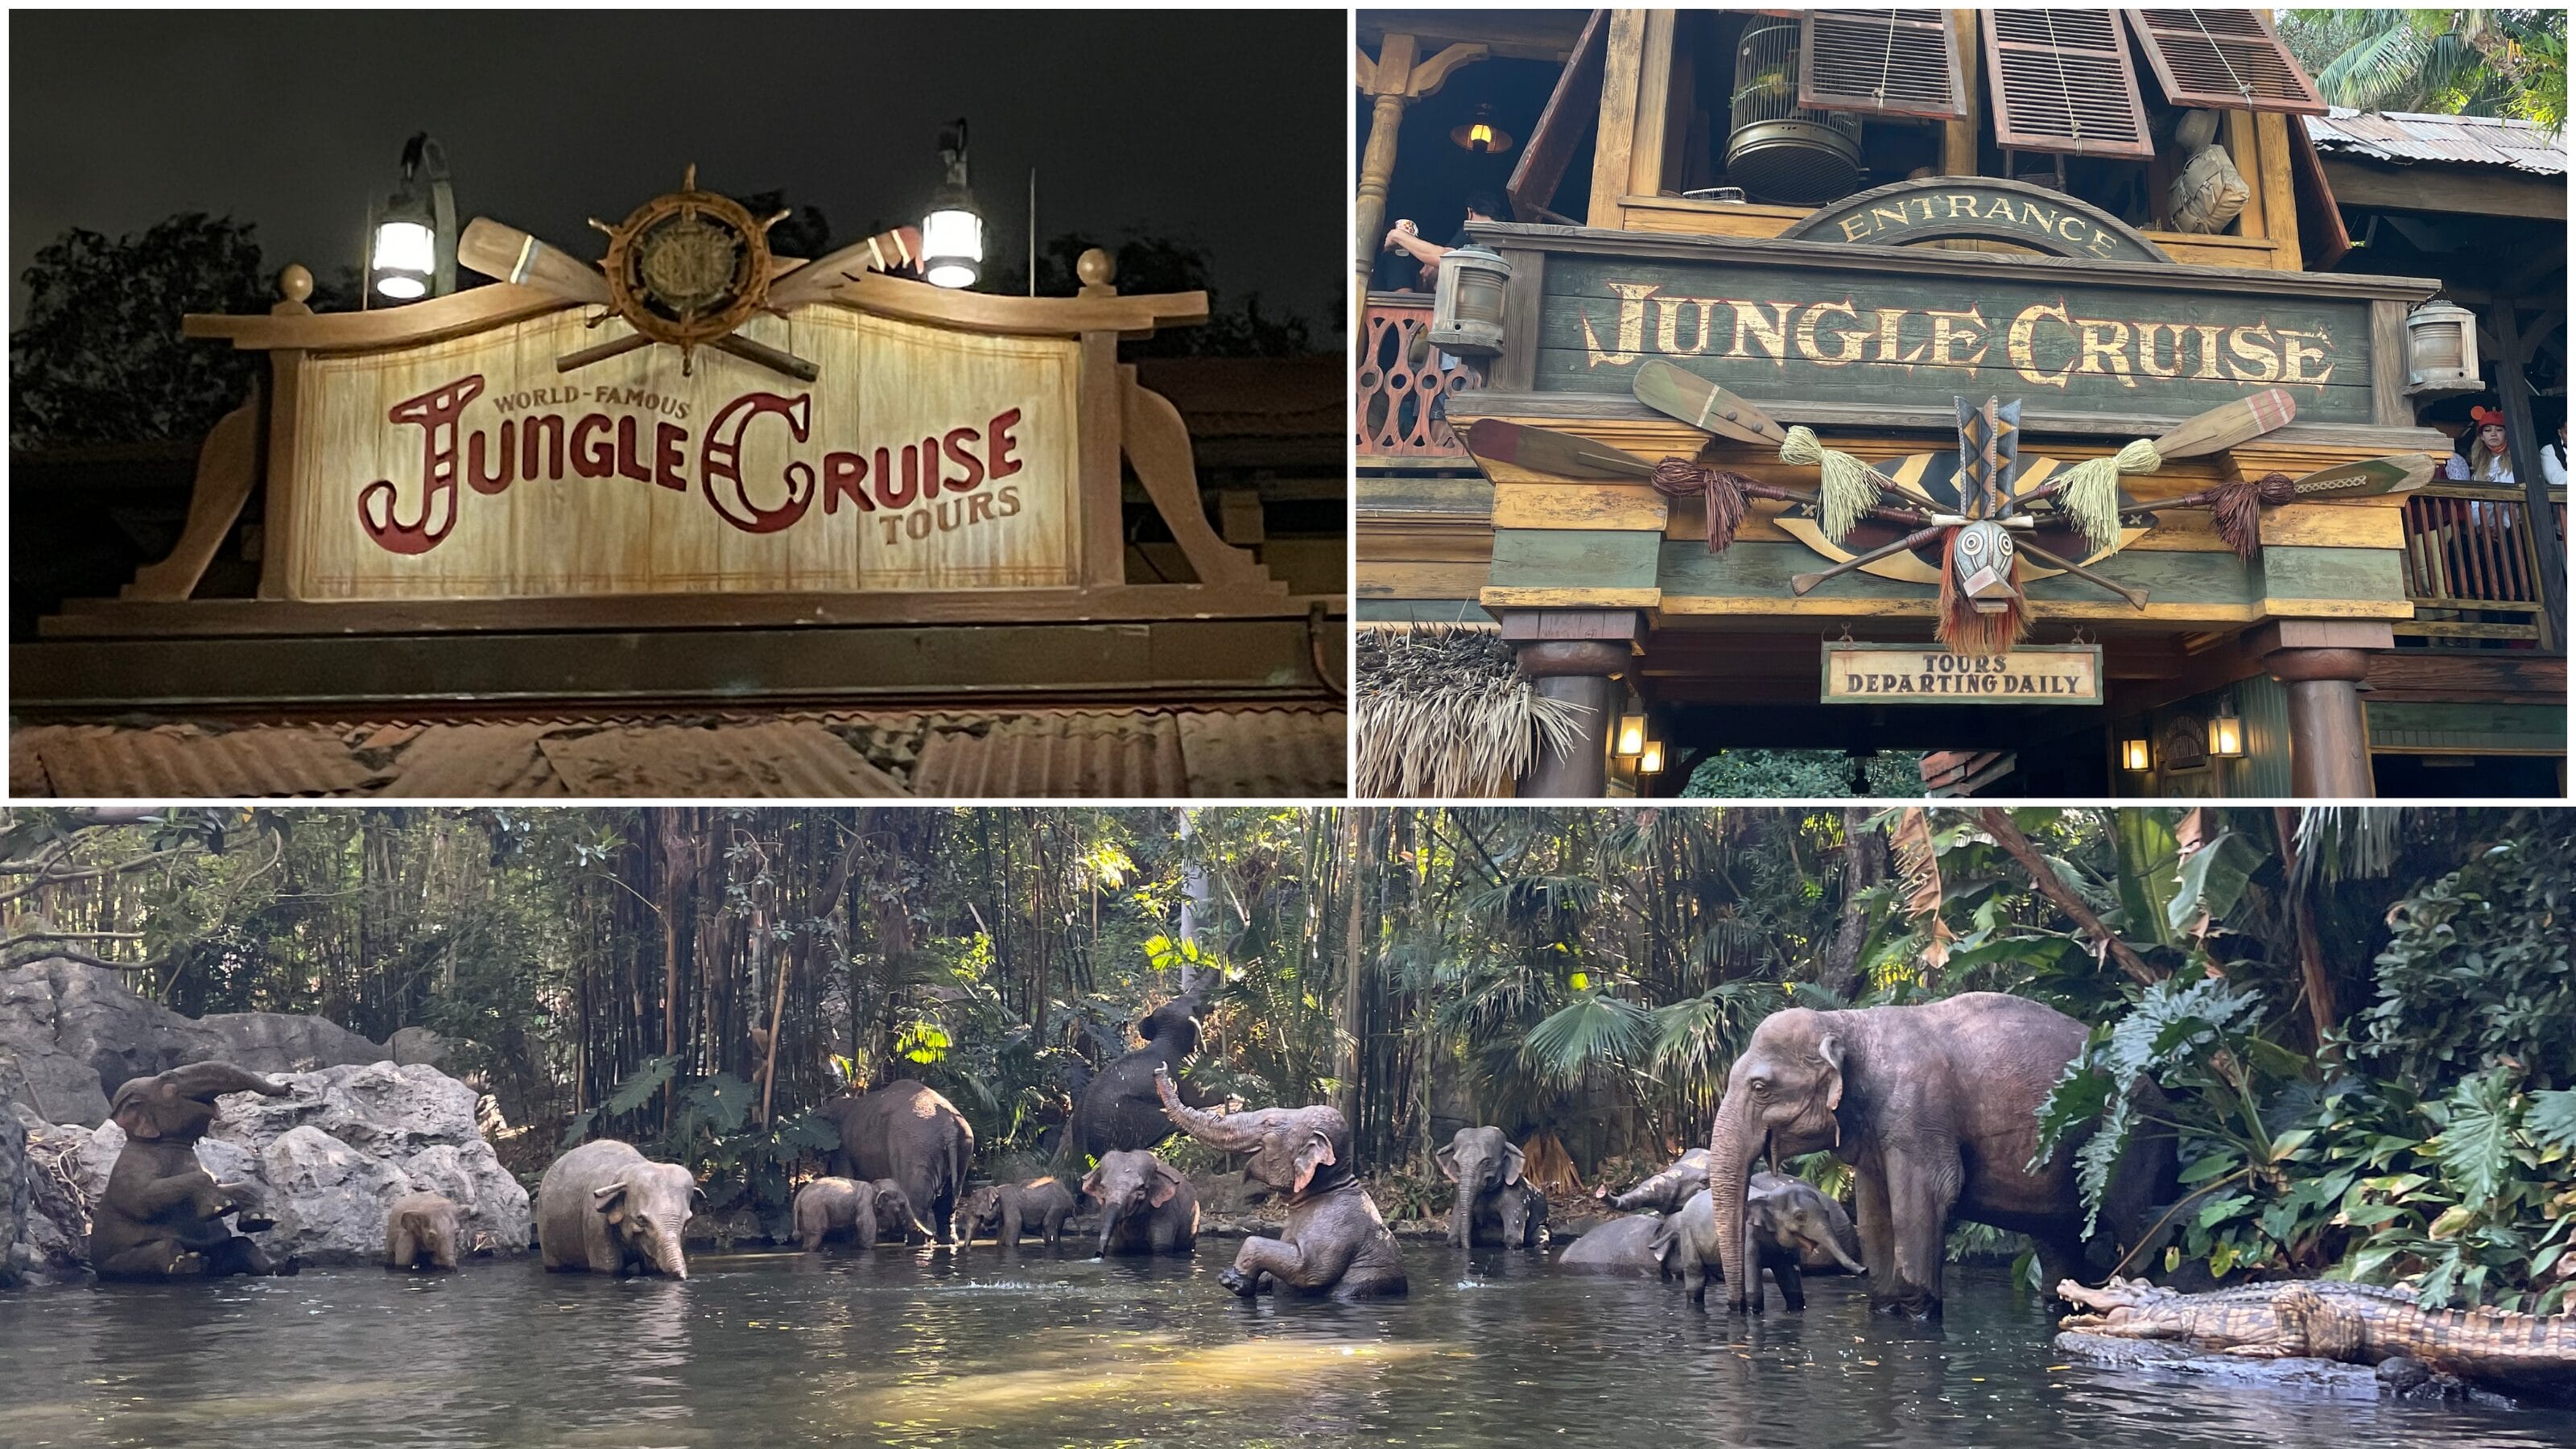 <p>Are you a Disney regular on one coast and a visitor on another? Here are some differences that you will notice between the attractions at each park. </p> <p>It’s interesting to note that Walt Disney World was built 16 years after the opening of Disneyland in 1955, but the newer attractions in Florida might not be as large or as entertaining as their older counterparts in California. Let’s look at a few differences between the rides to manage your expectations when visiting both locations. </p>